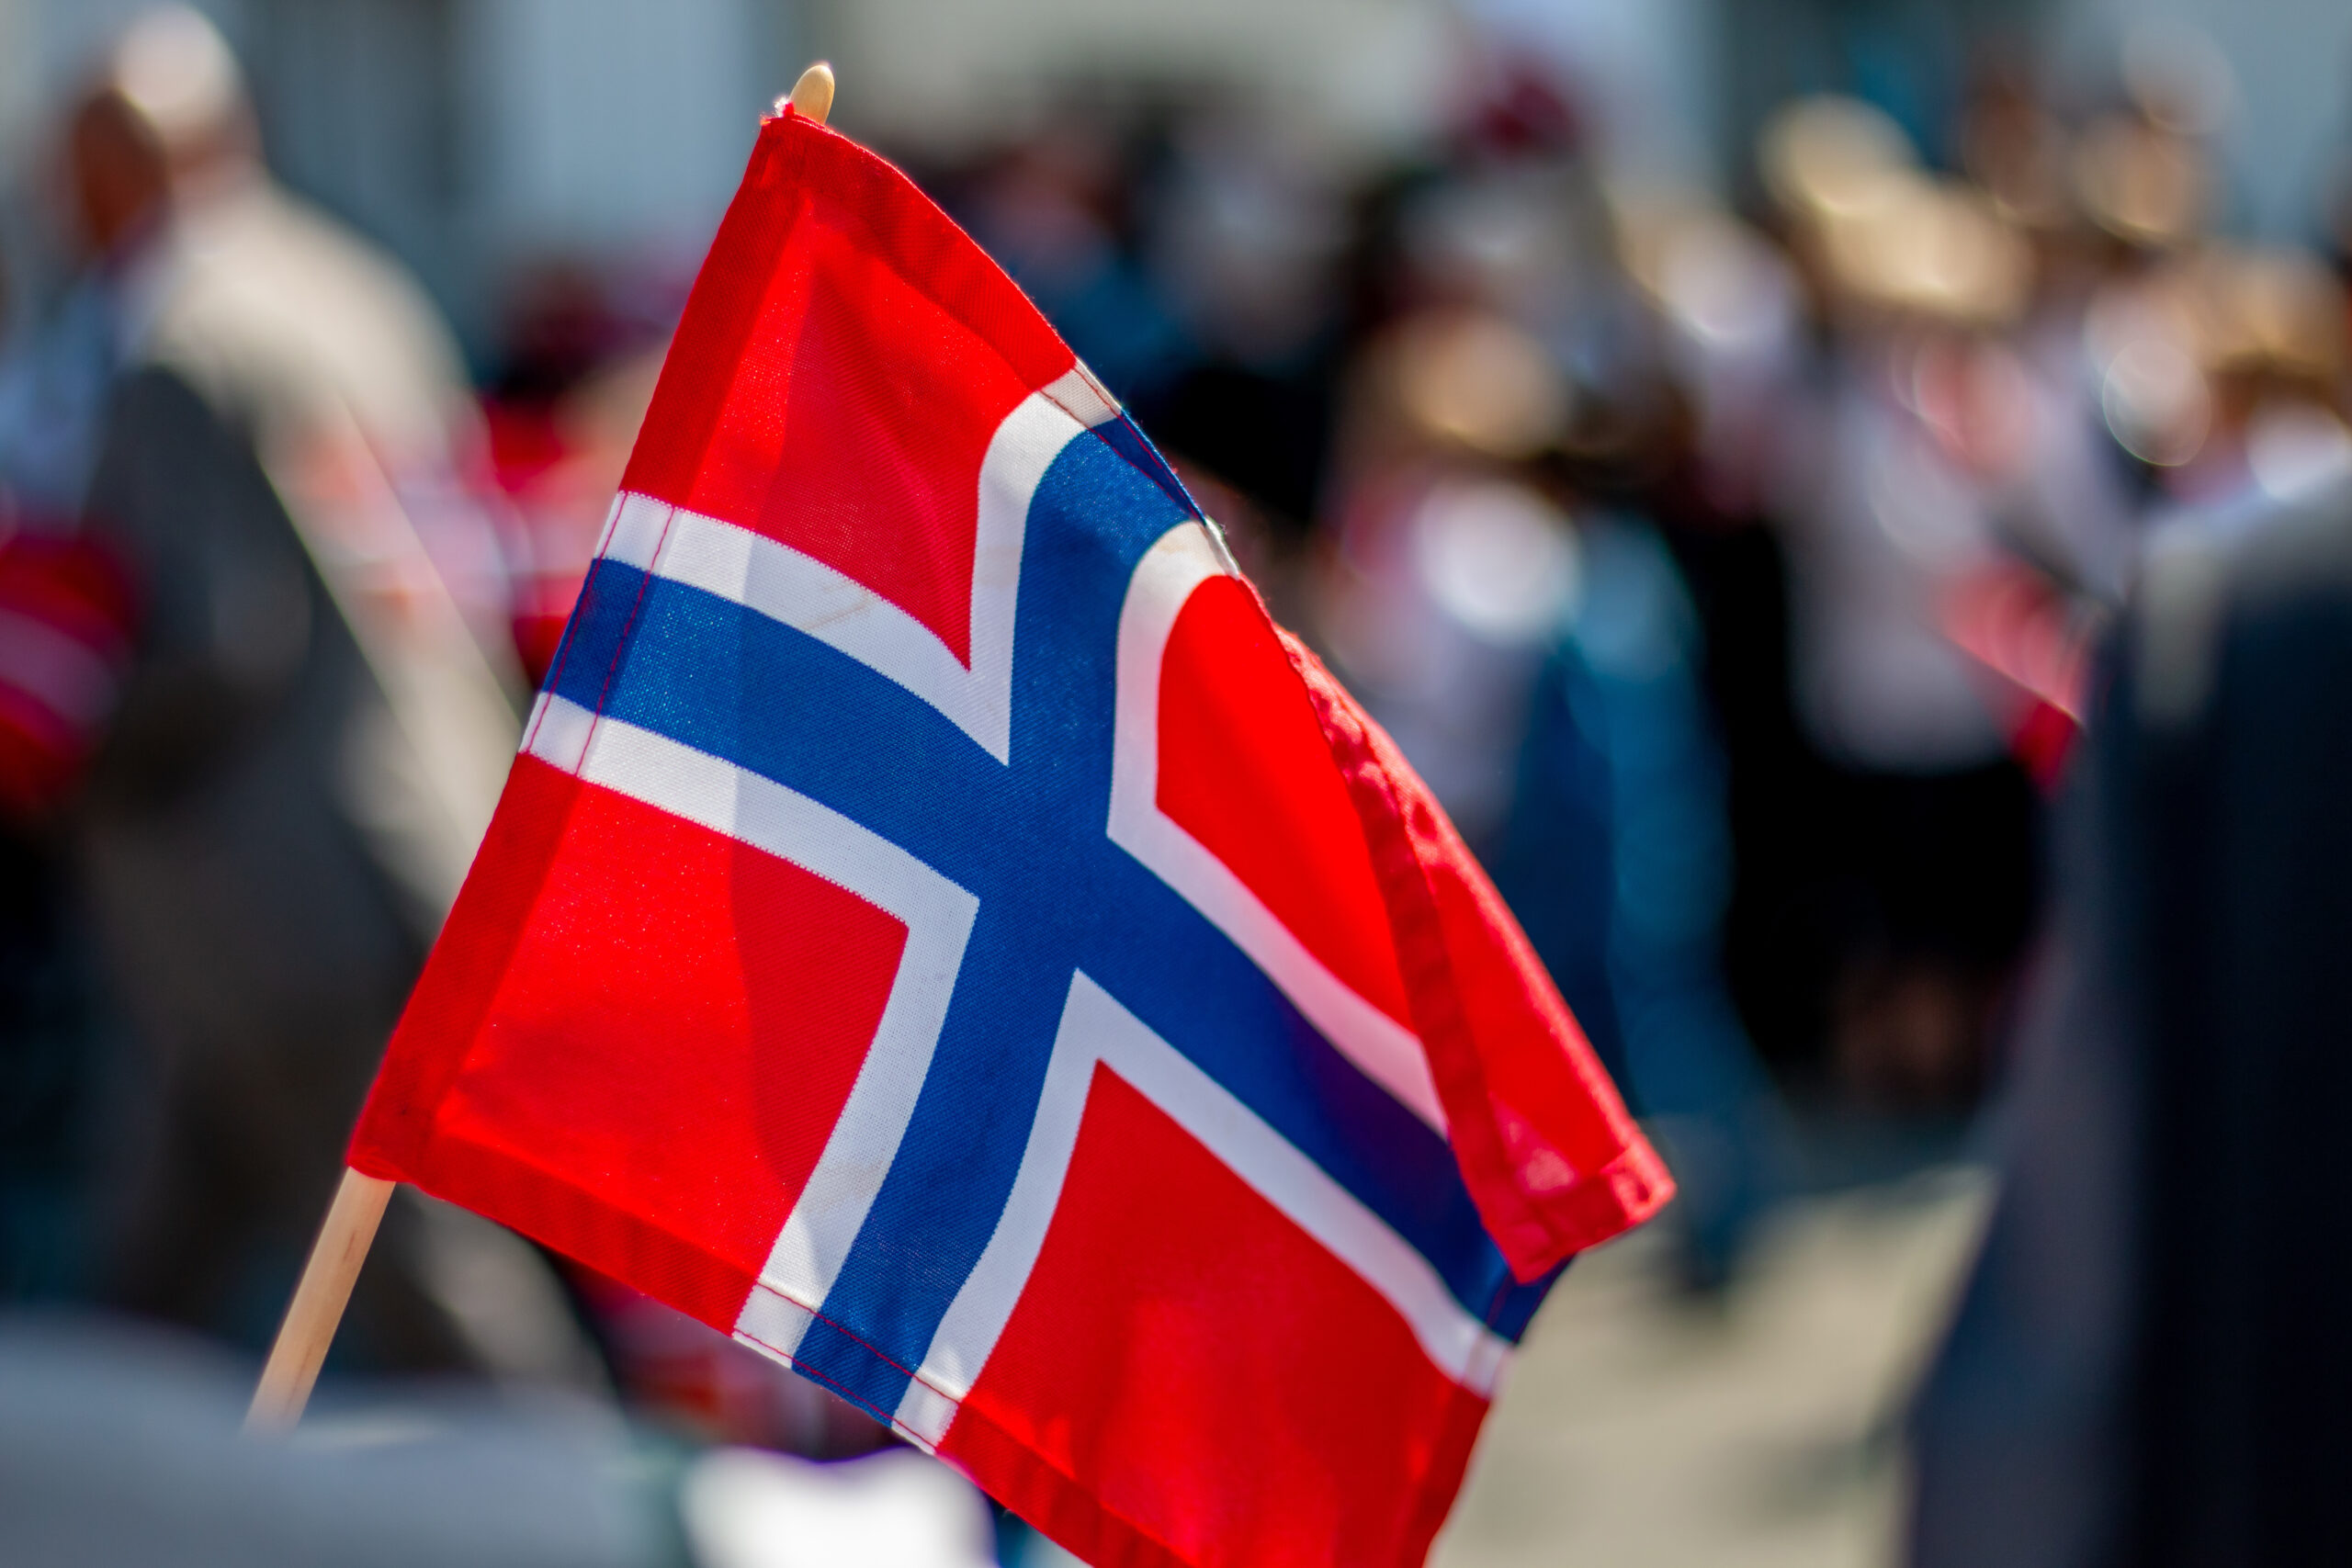 Norway's new climate target aims to cut emissions by at least 55%